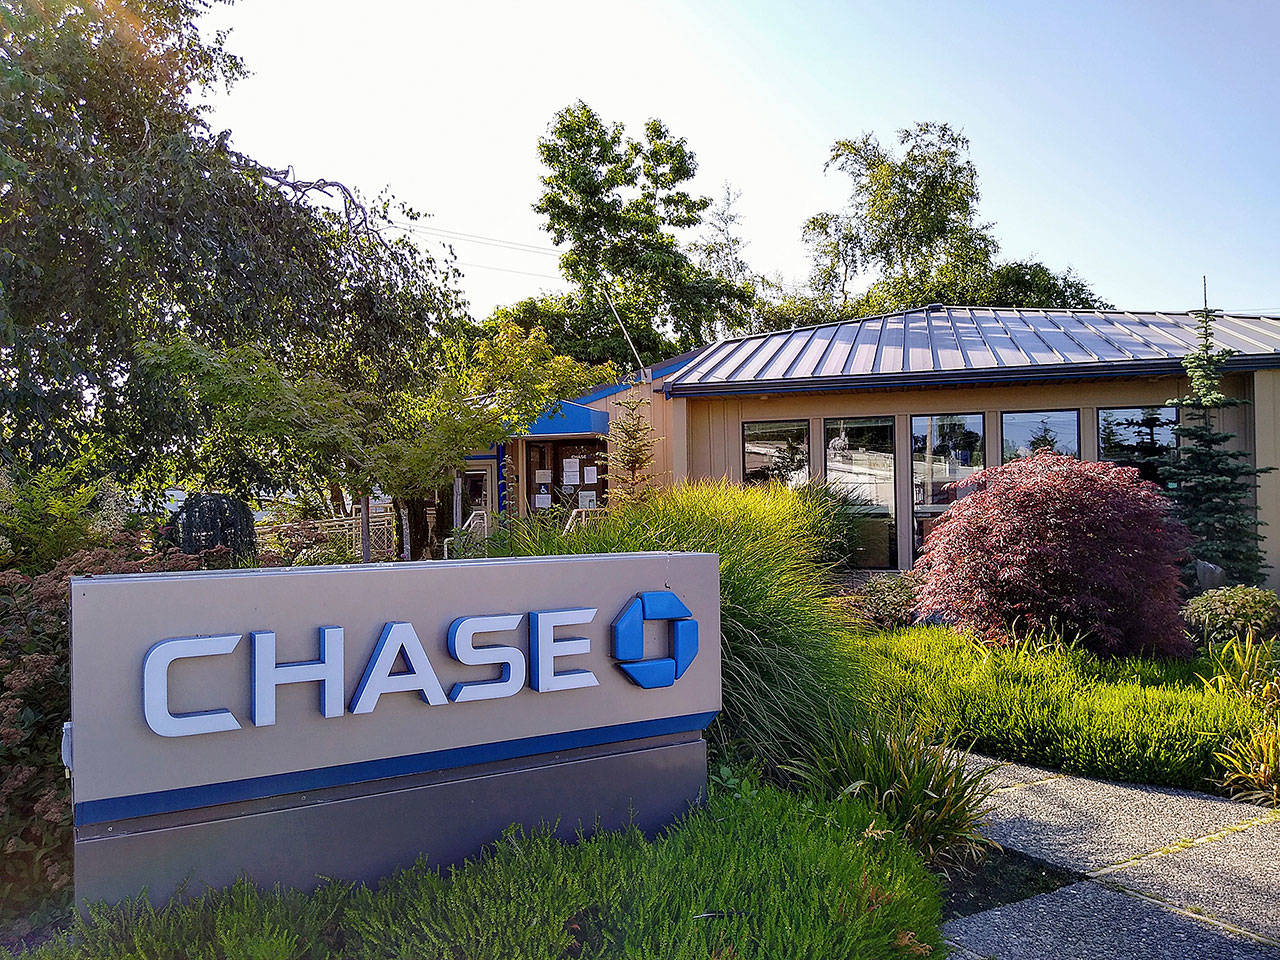 Two employees of Chase Bank on Vashon tested positive for COVID-19 last week according to the spouse of one of the employees who has been sickened by the virus (Paul Rowley/Staff Photo).